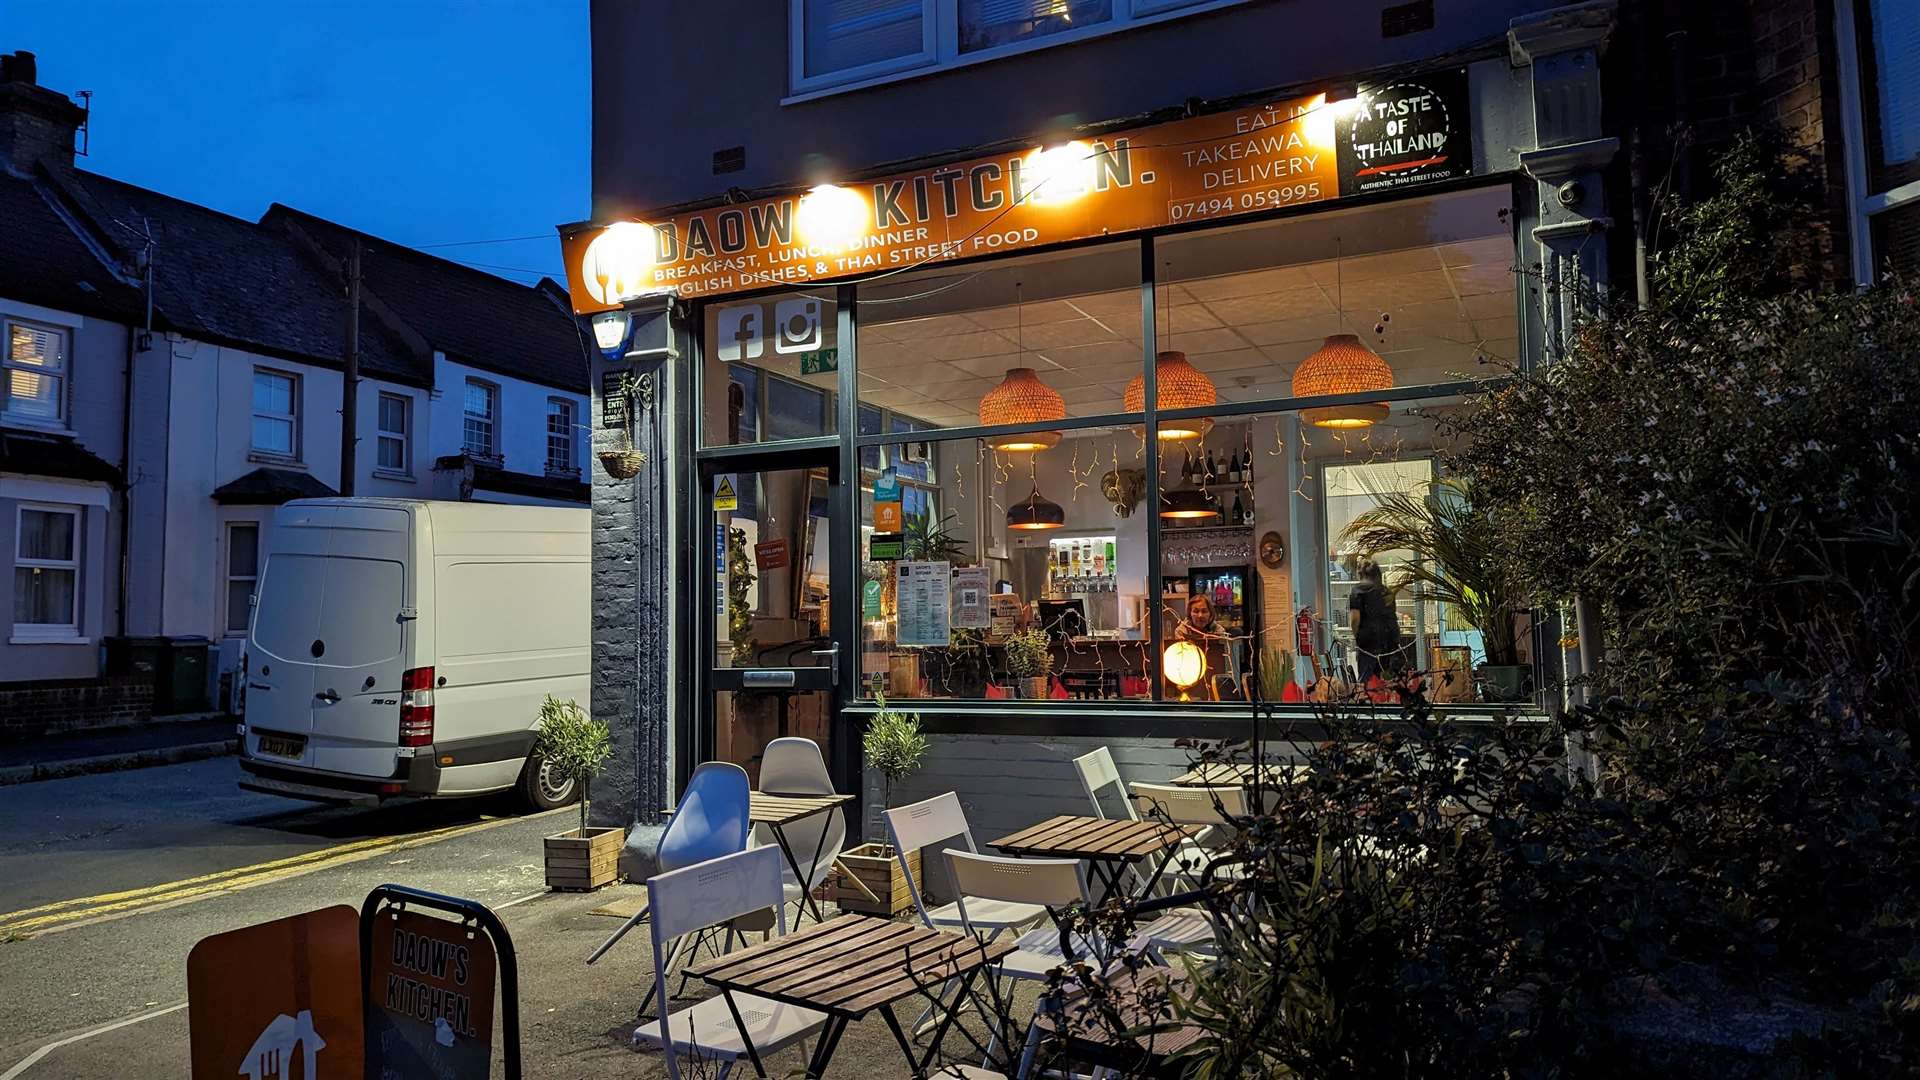 Daow's Kitchen in Cheriton is well worth a detour